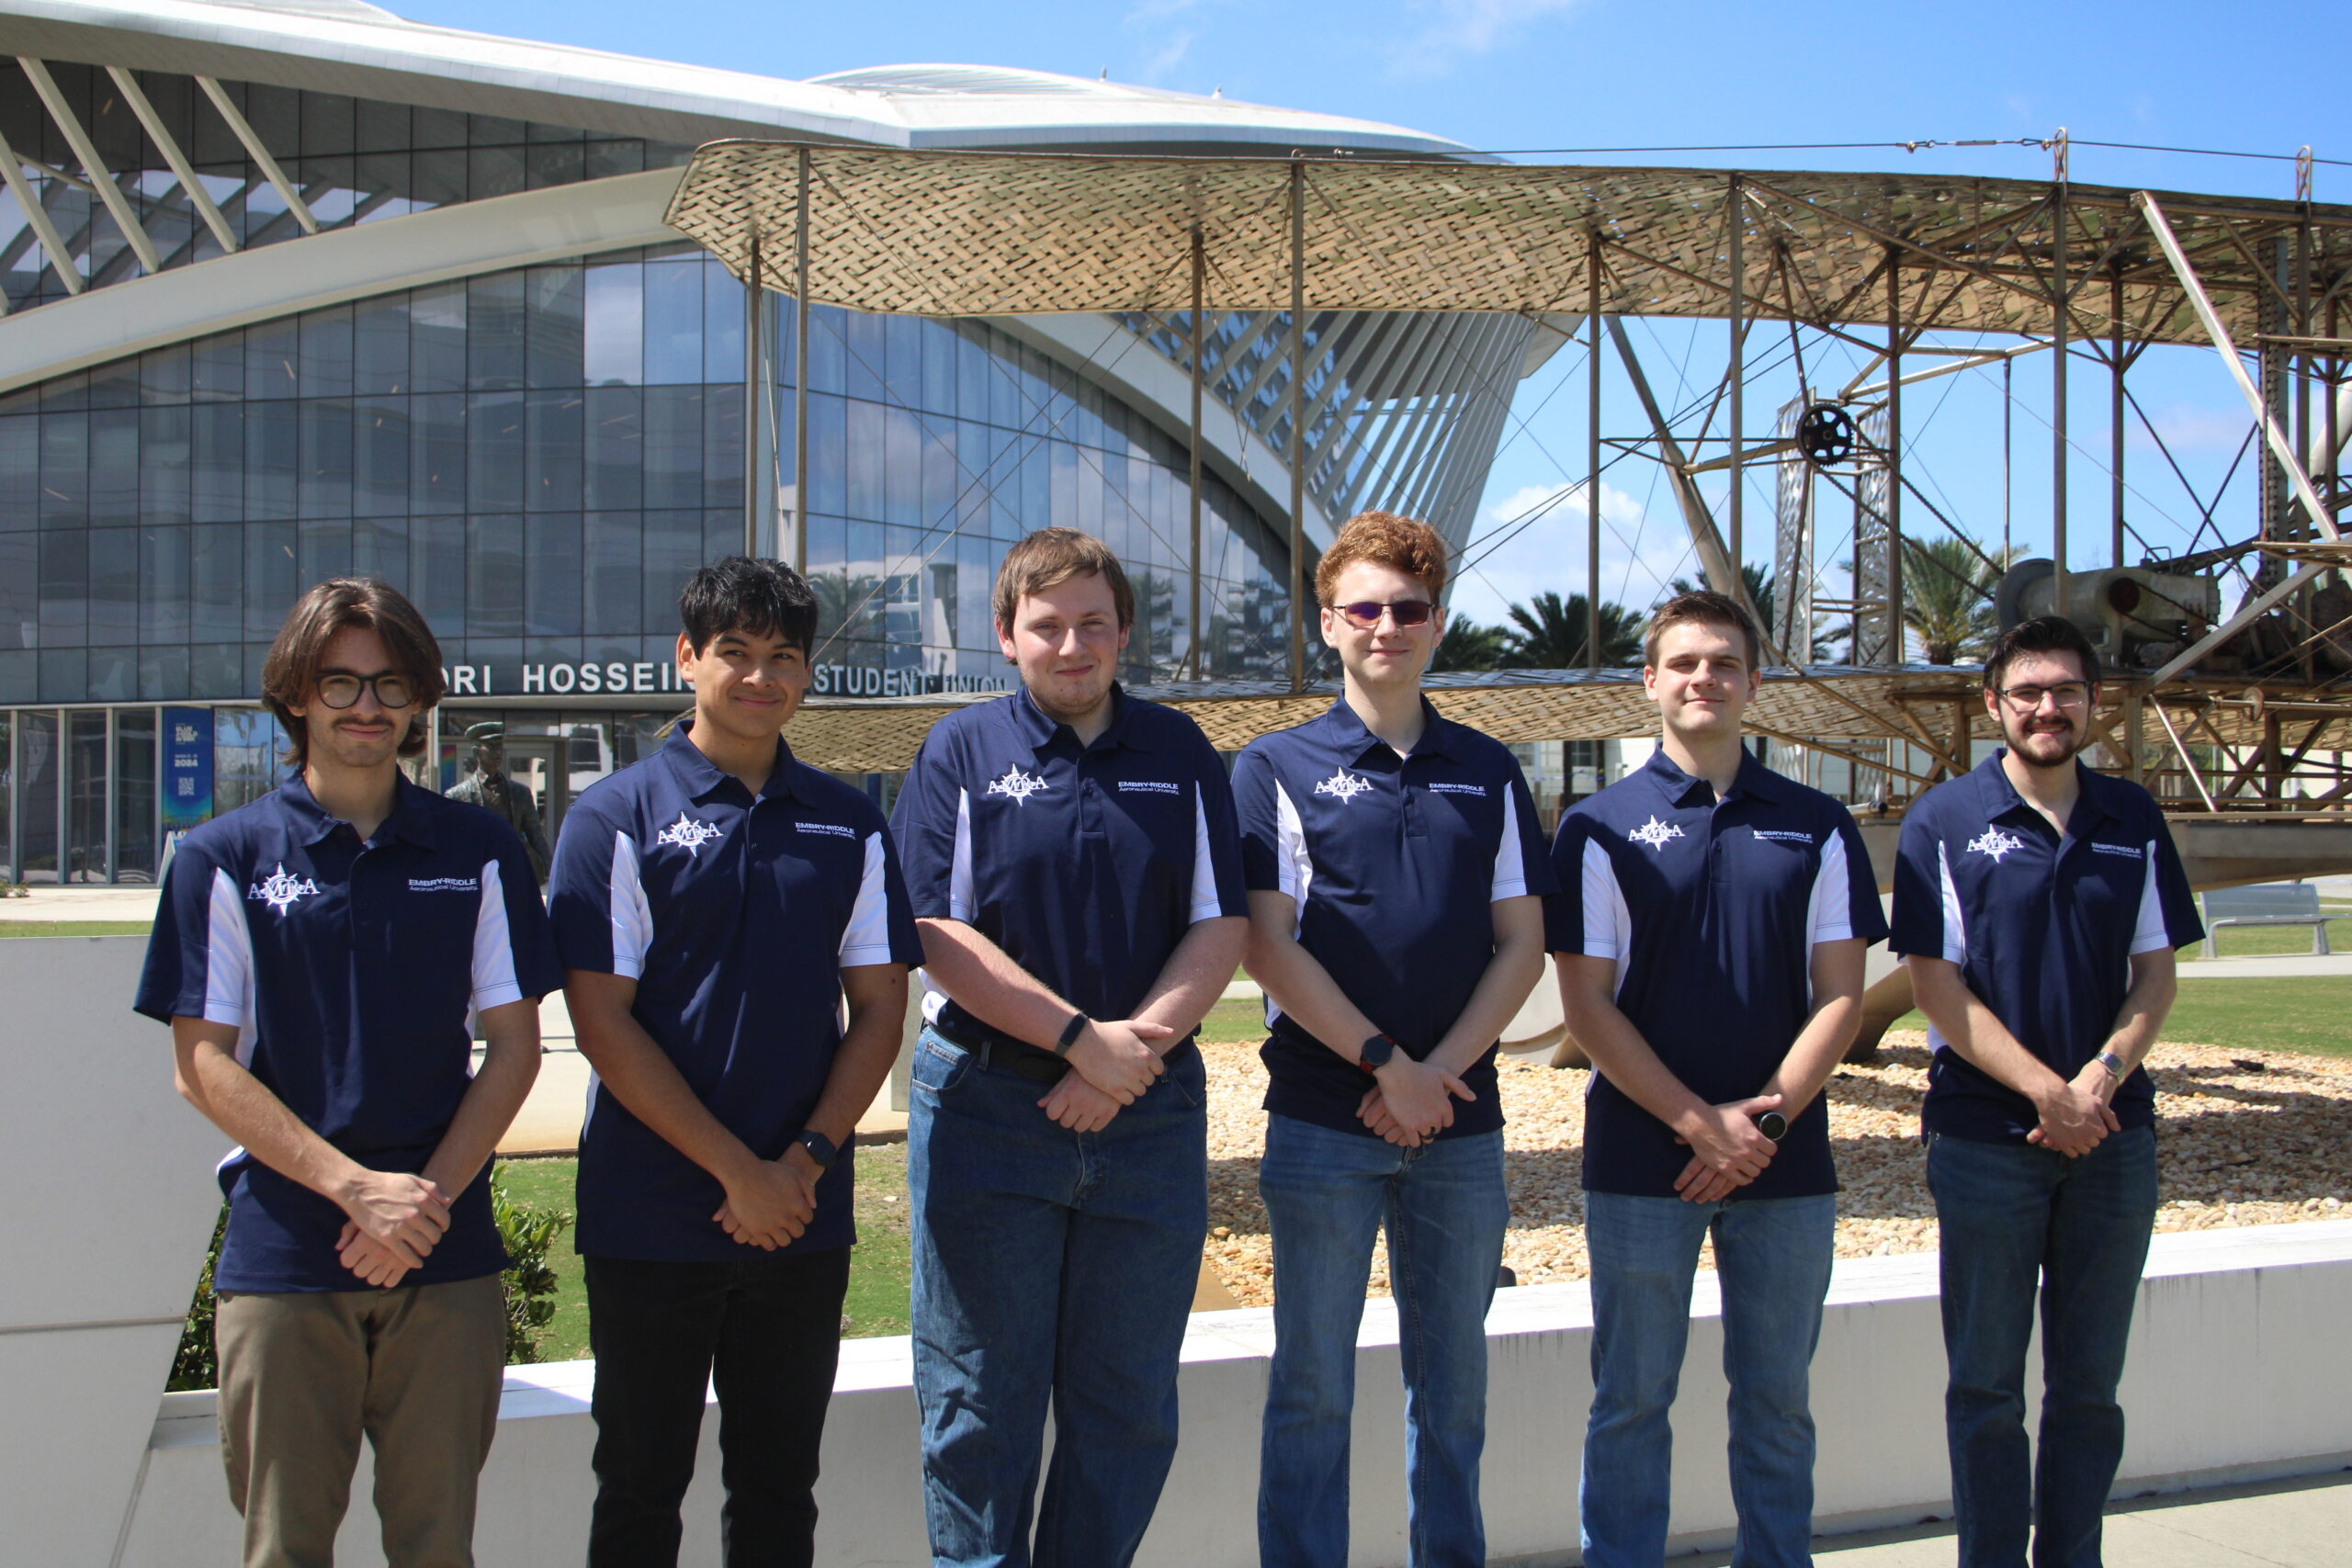 Group photo of Wave Co. standing in front of Embry-Riddle student union